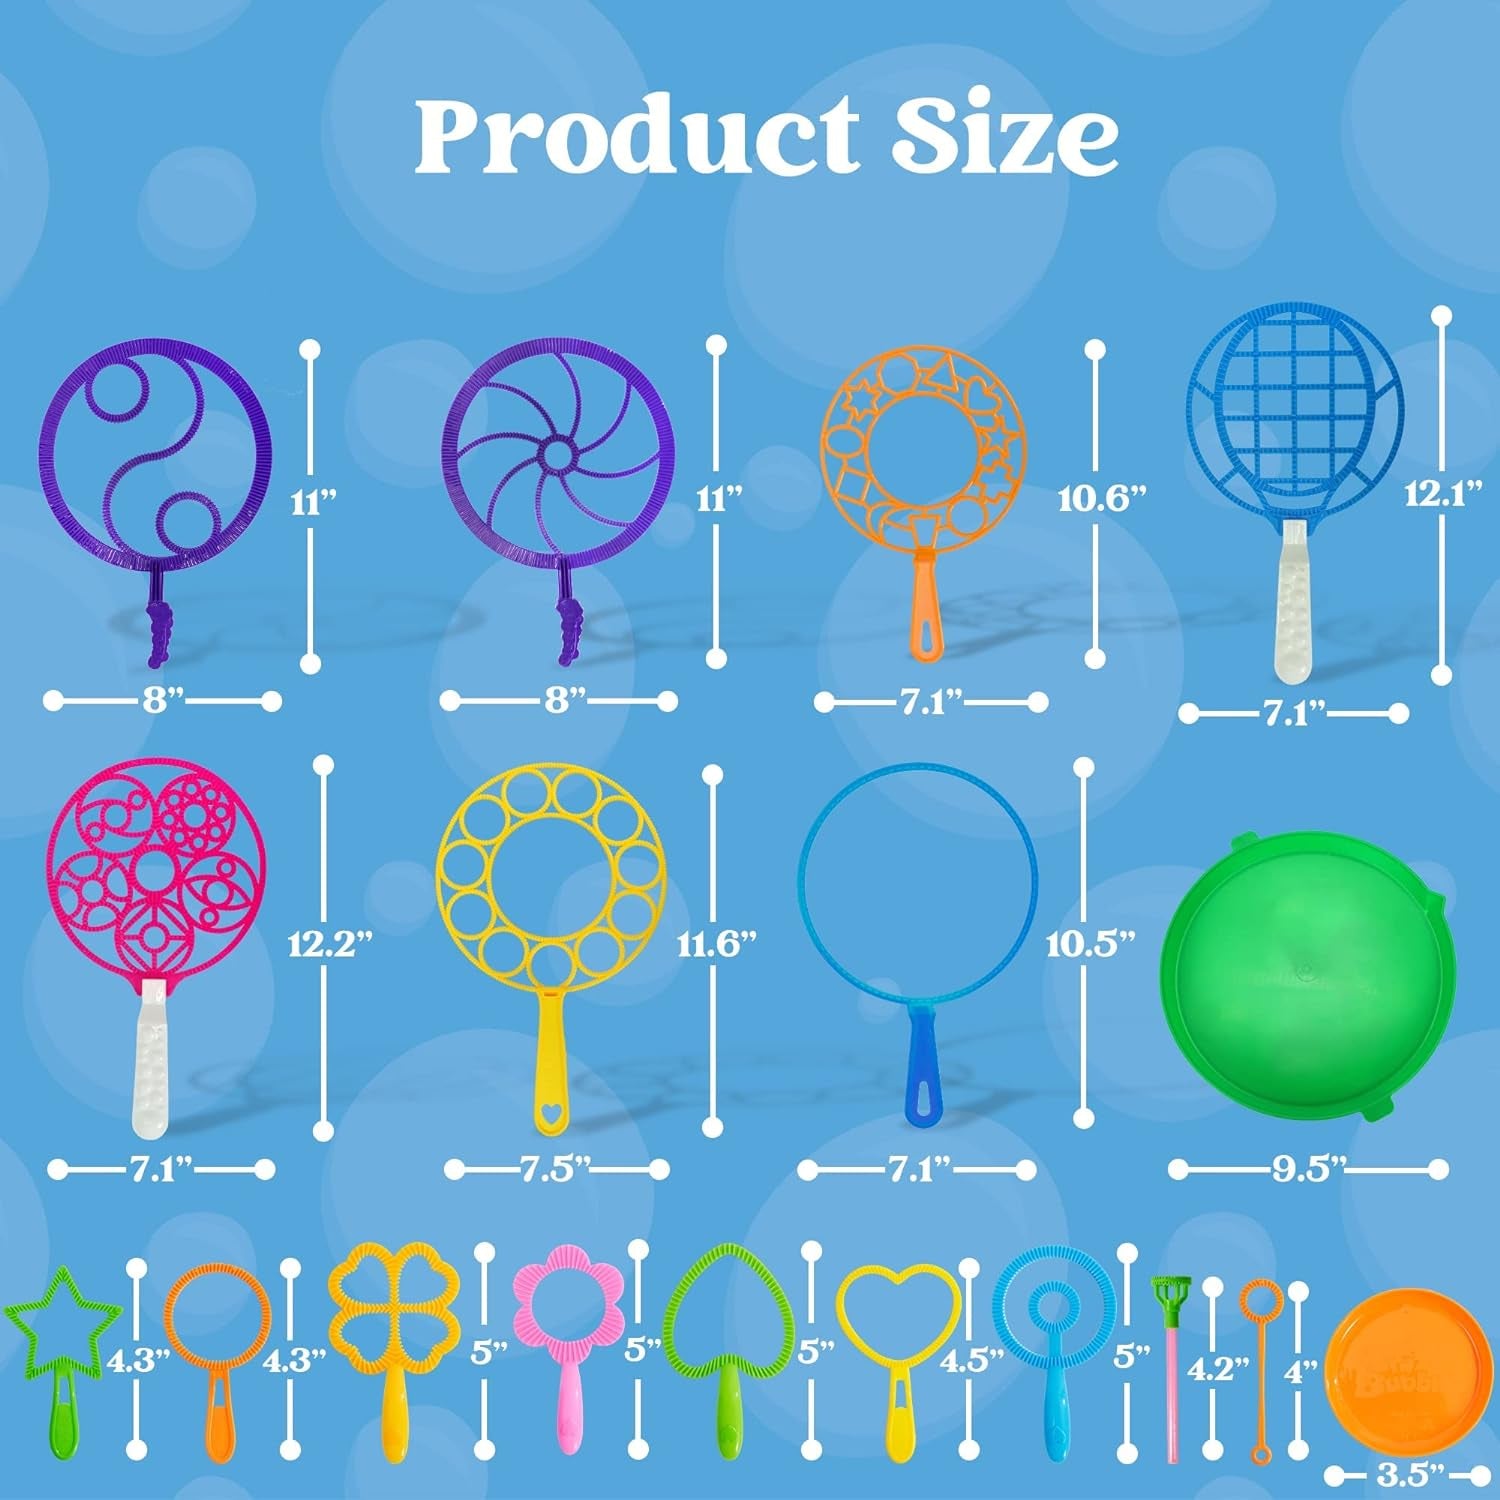 Big Bubble Wands Set Bulk for Kids Summer Outdoor Activity Party Favors, 18 Pcs Giant Bubble Maker with Tray, 12" Large, 6 Pcs Bubble Solution Suitable for All Age People